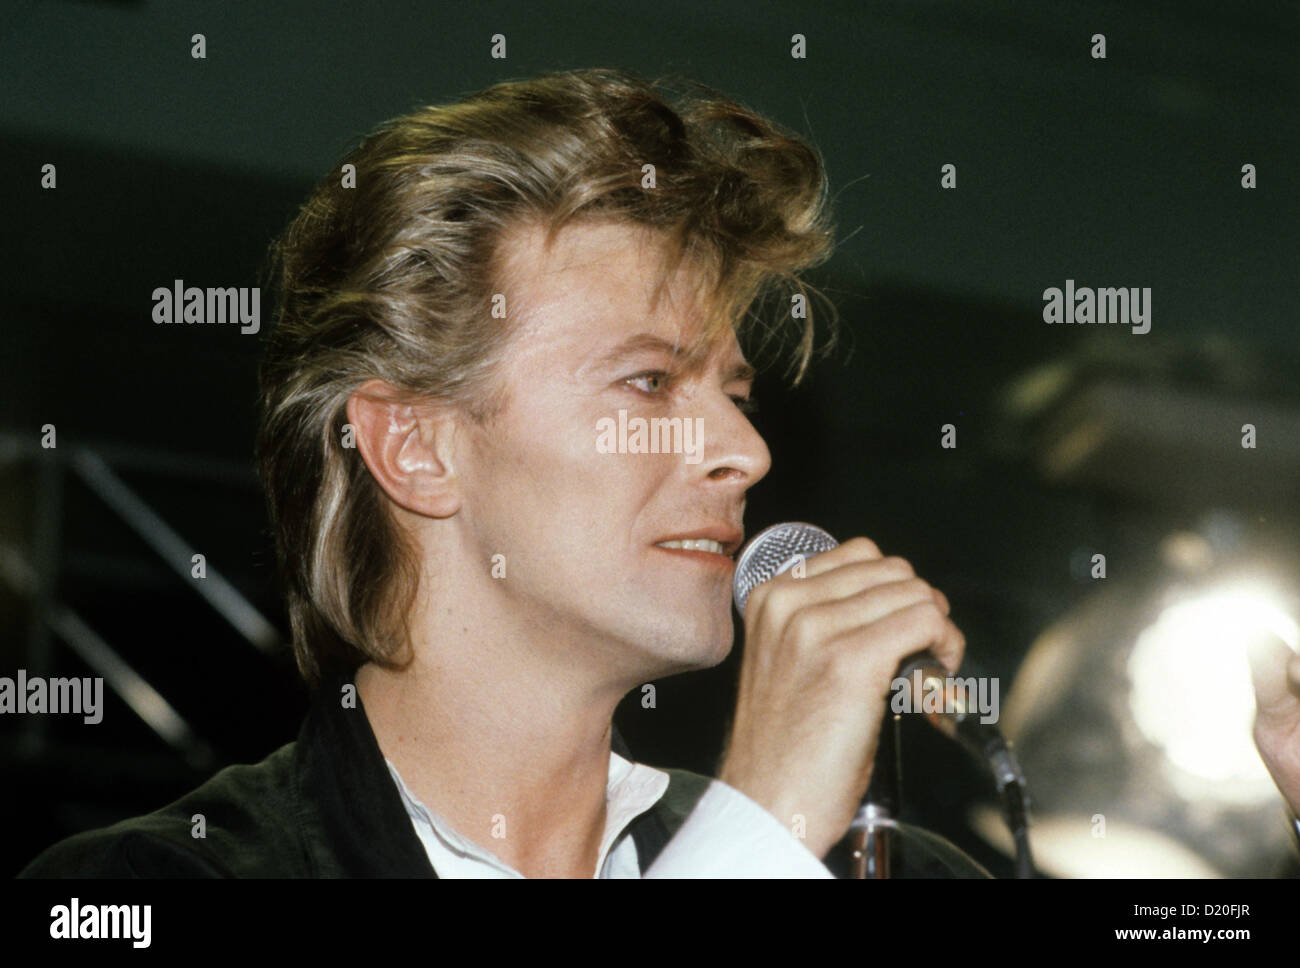 David Bowie in concert on 26 March 1987 in Munich - Germany. Stock Photo